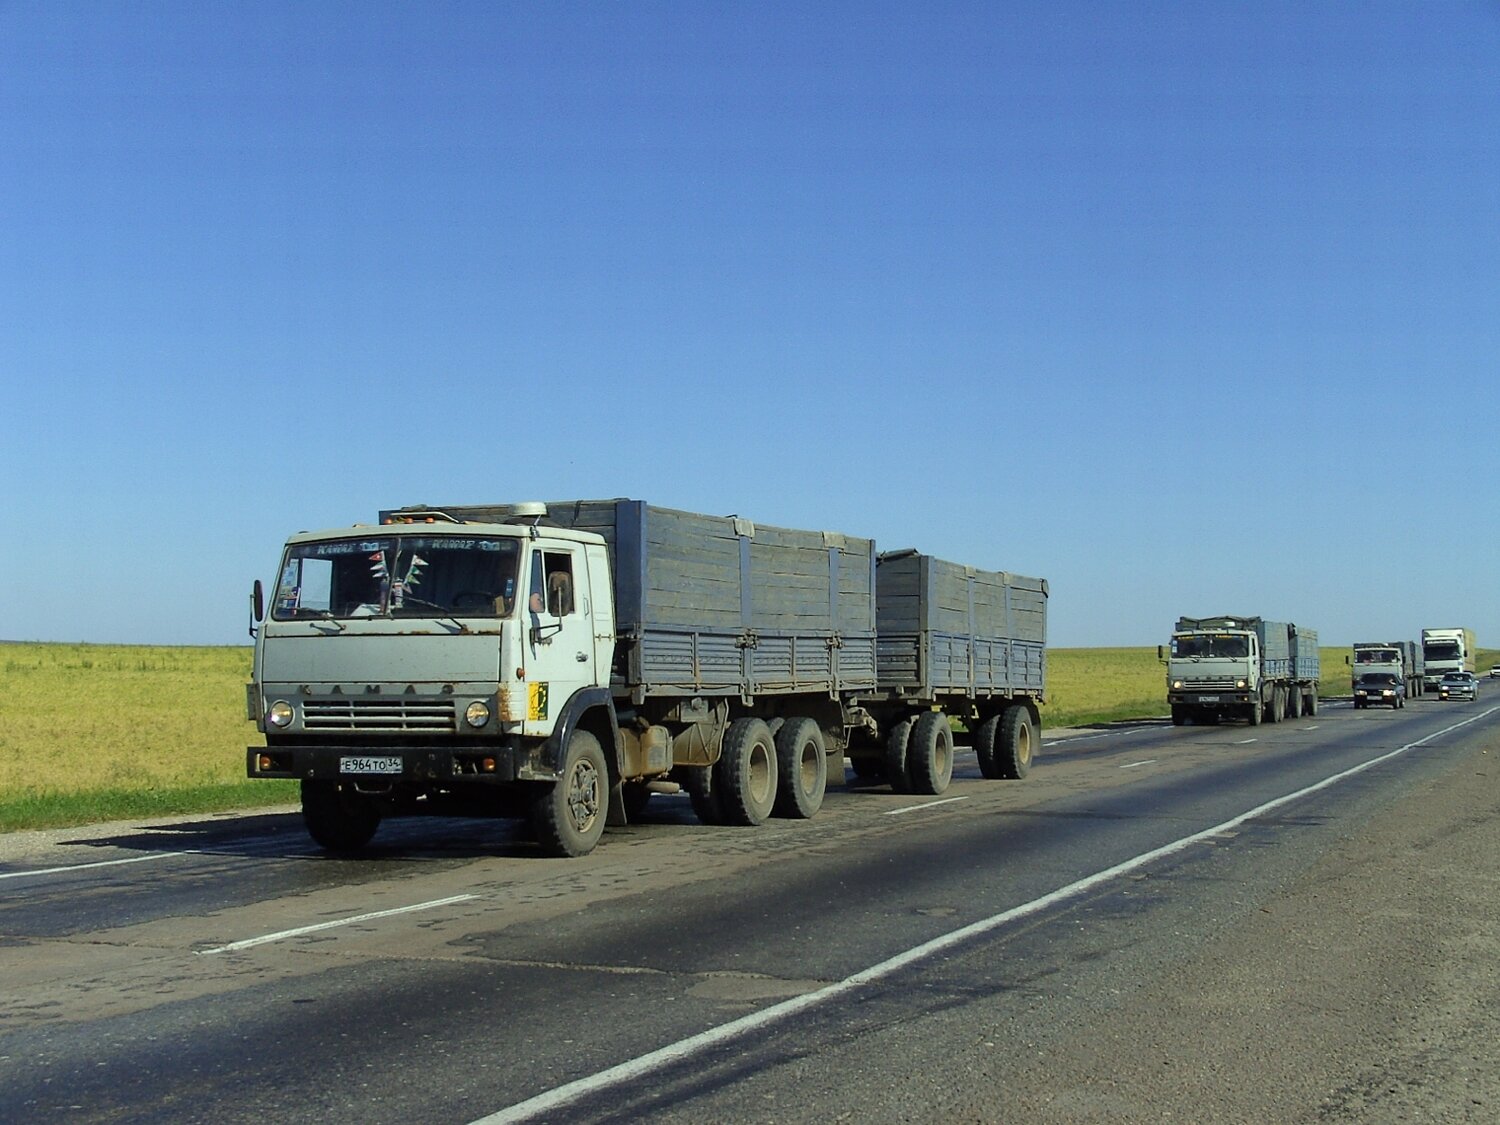 A full ban on trucks with Russian trailers and semi-trailers from transporting goods to the EU.